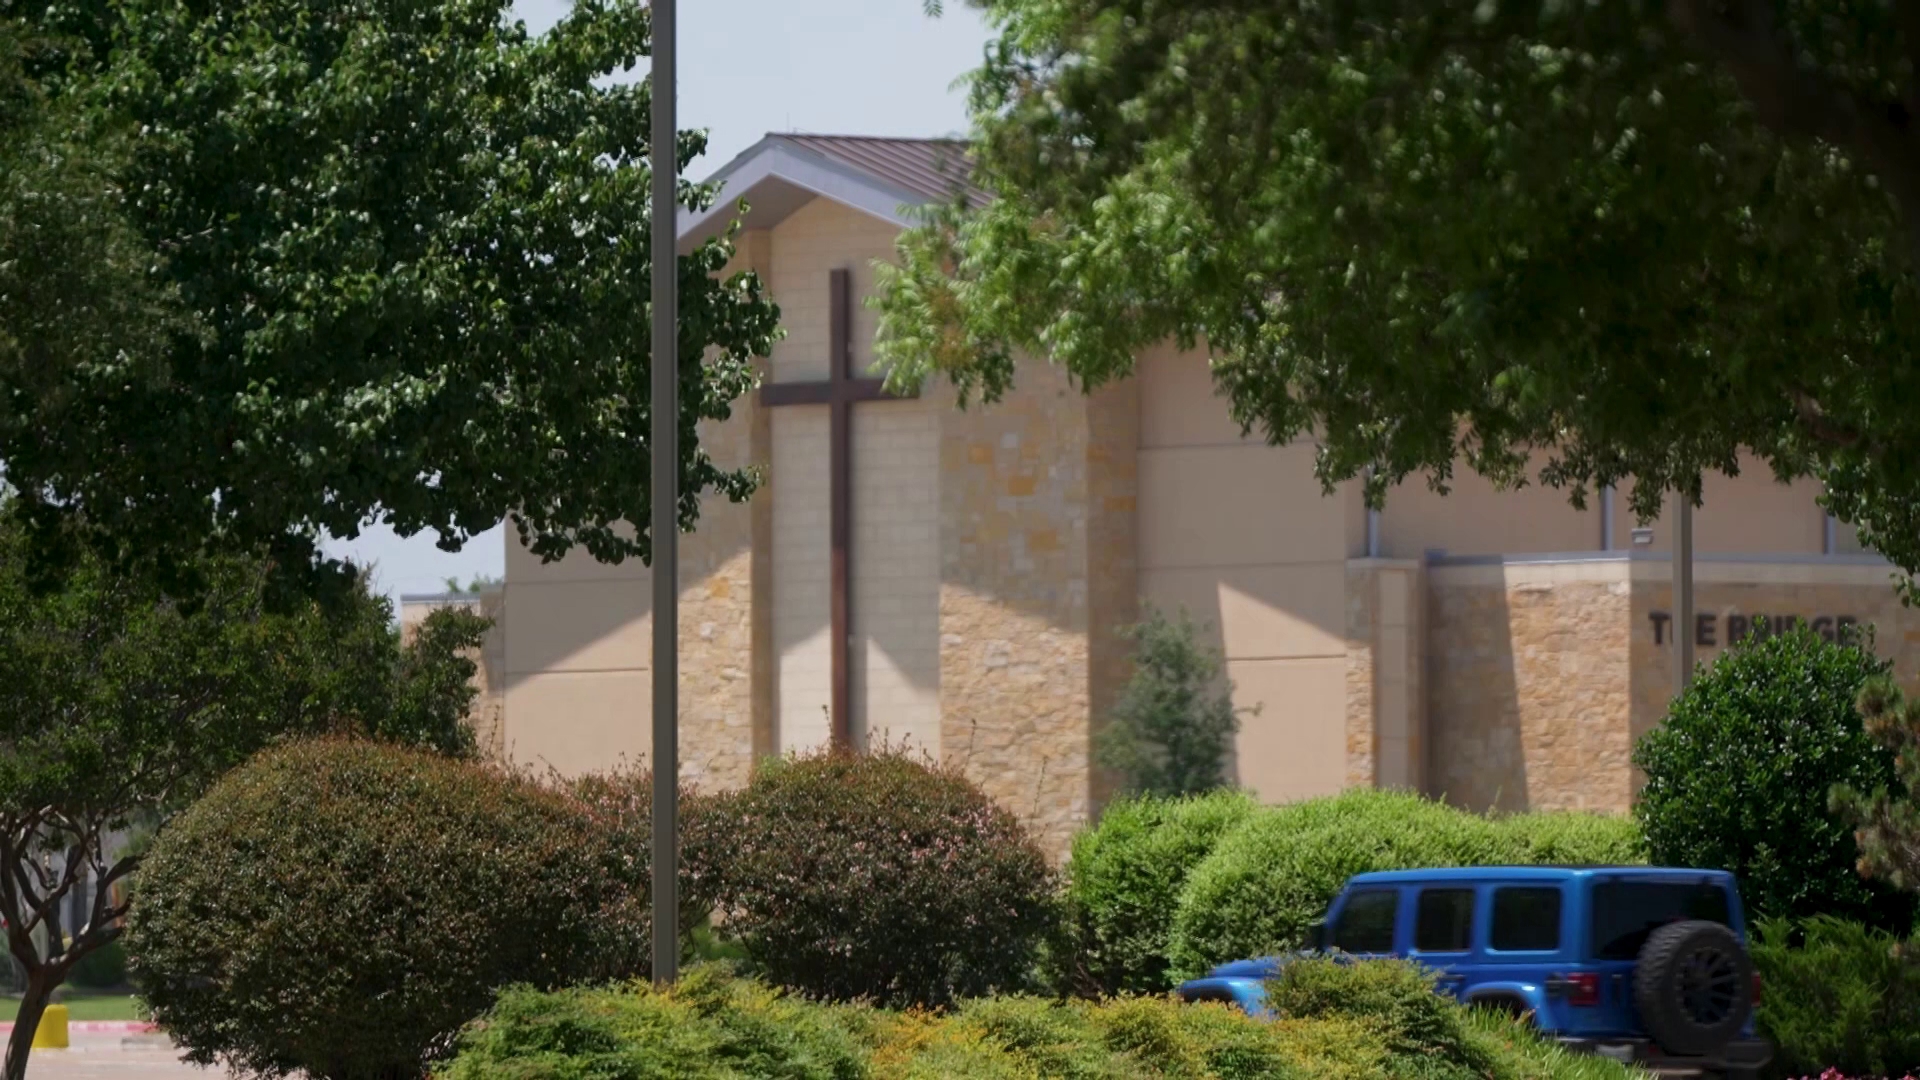 The church says a "staff member made the unfortunate decision to attempt to sign people up from within Lakepointe to positively impact the count."